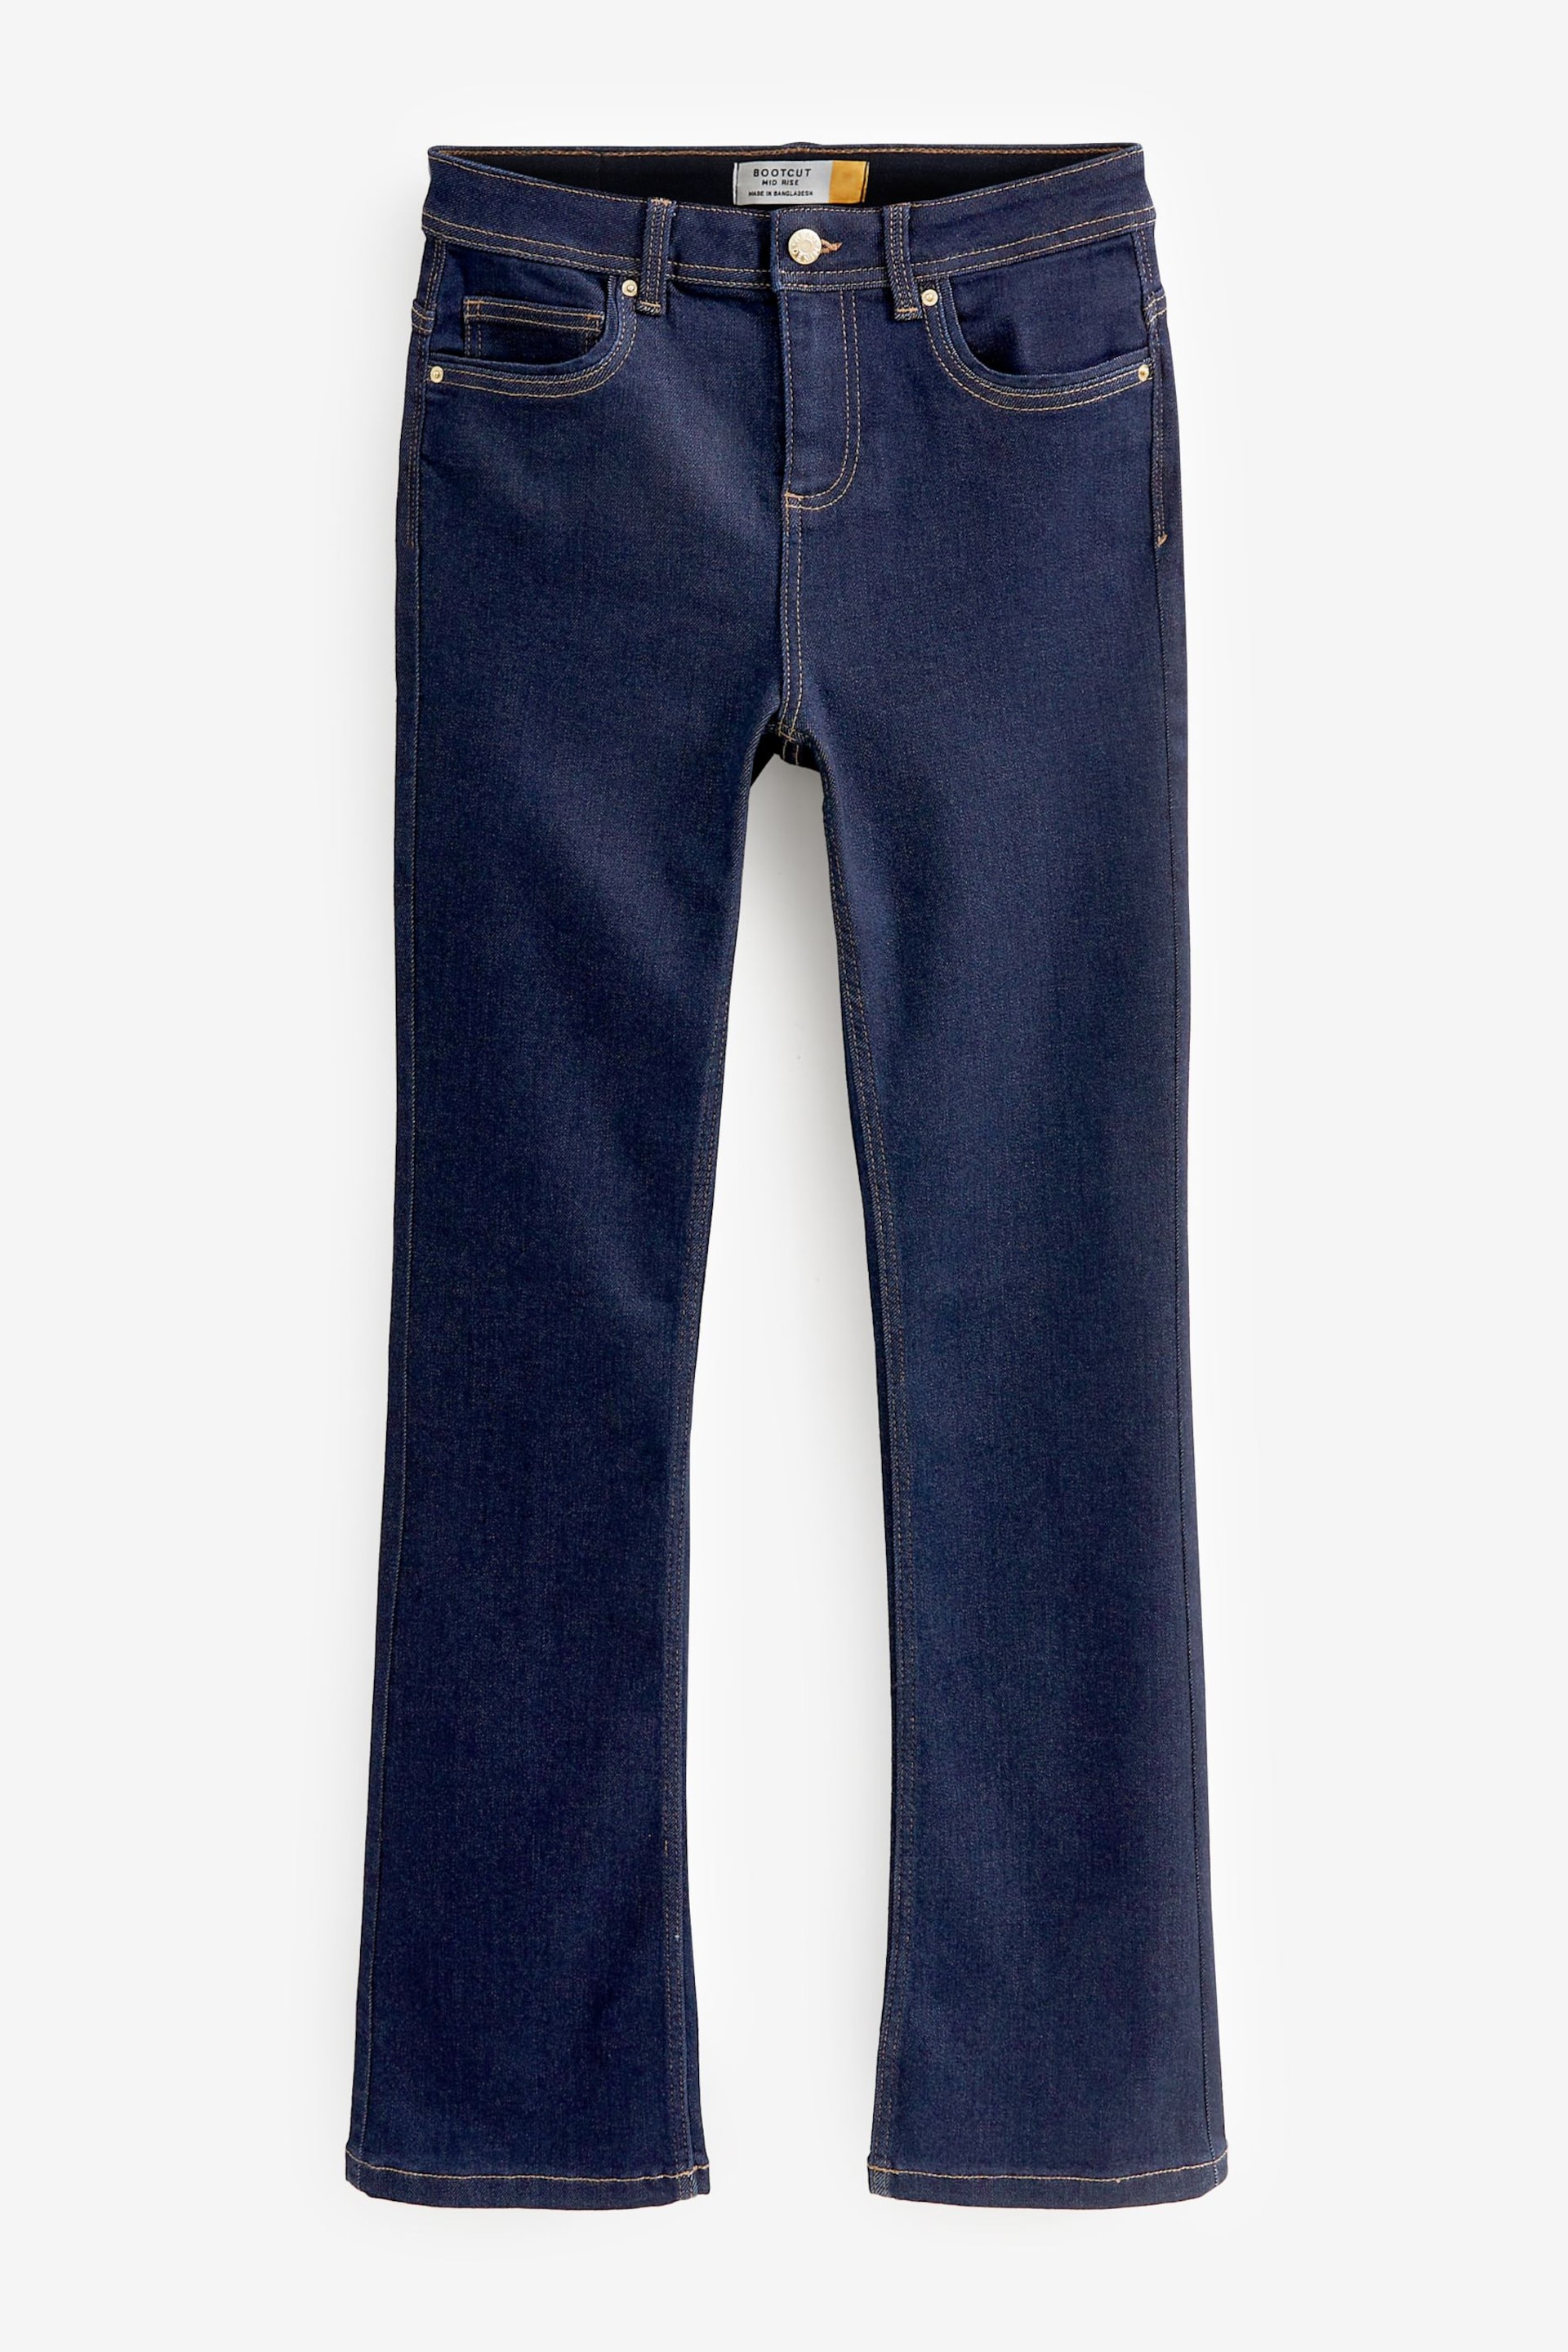 Rinse Blue Supersoft Bootcut Jeans - Image 6 of 6